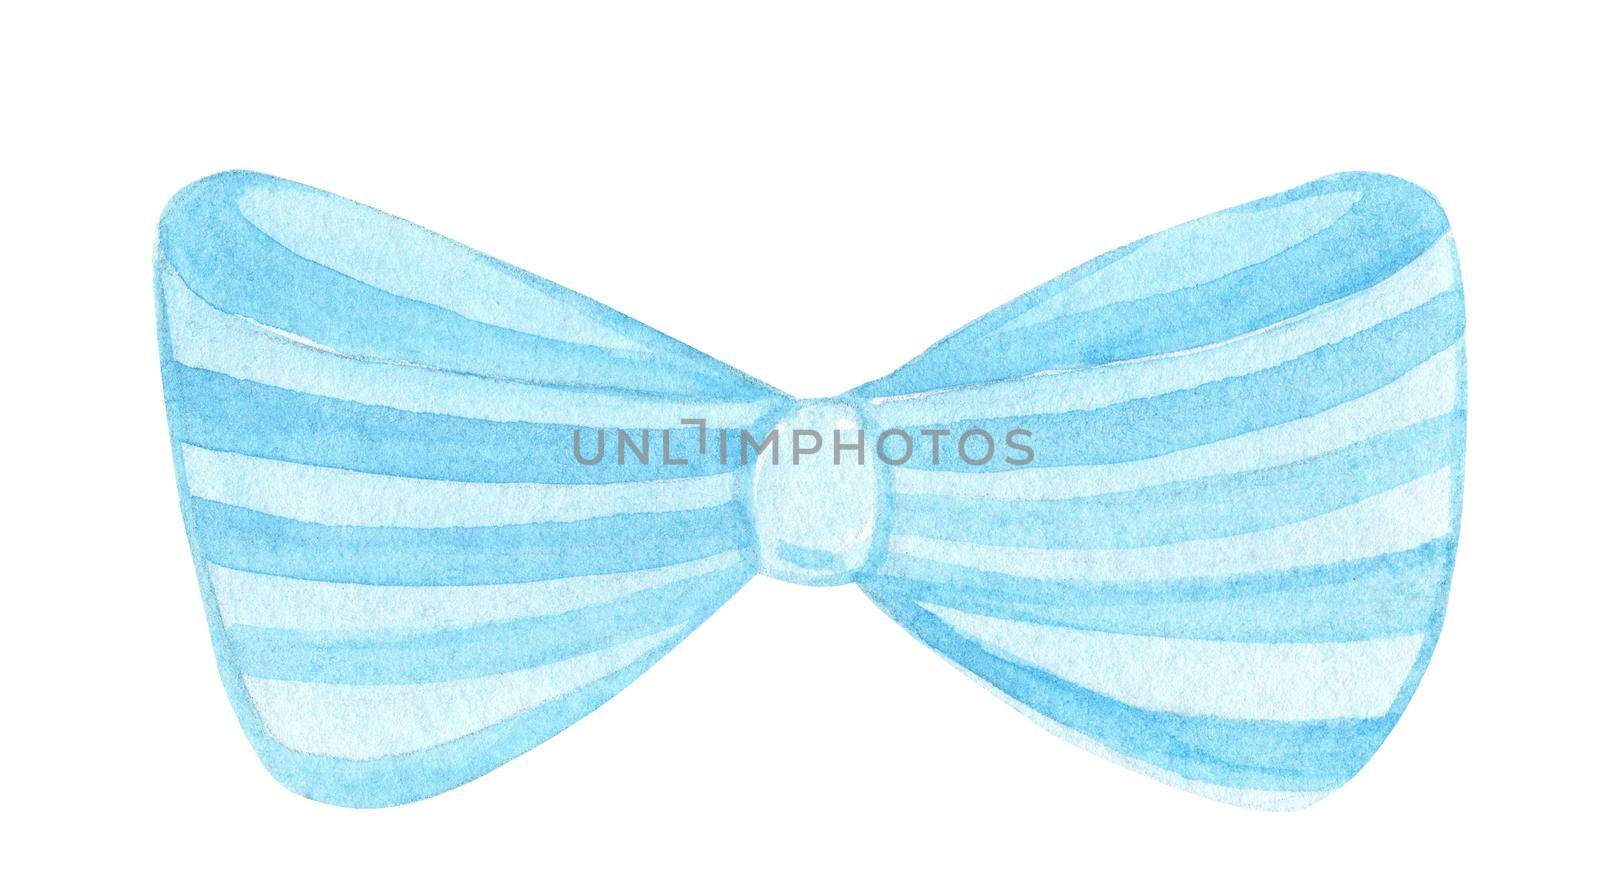 watercolor hand drawn blue bow with stripes isolated on white background by dreamloud